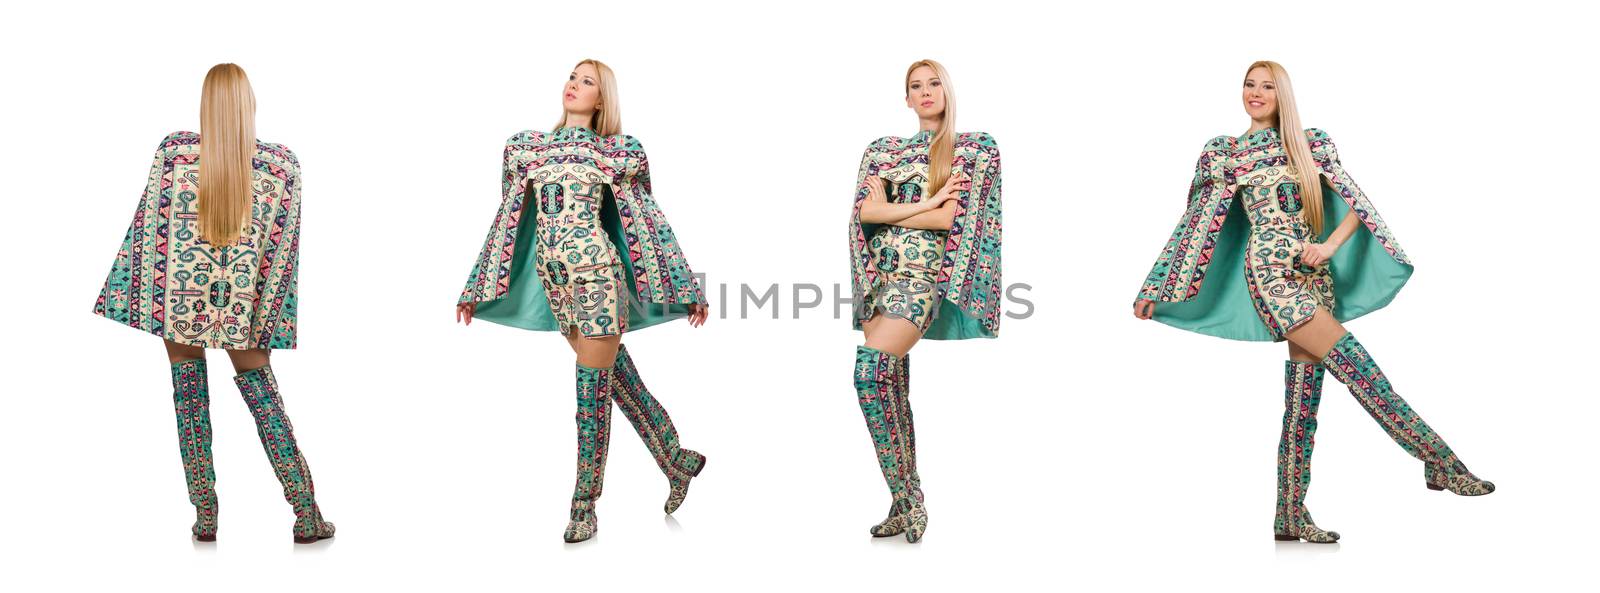 Woman in fashion concept isolated on whitModel wearing dress wit by Elnur